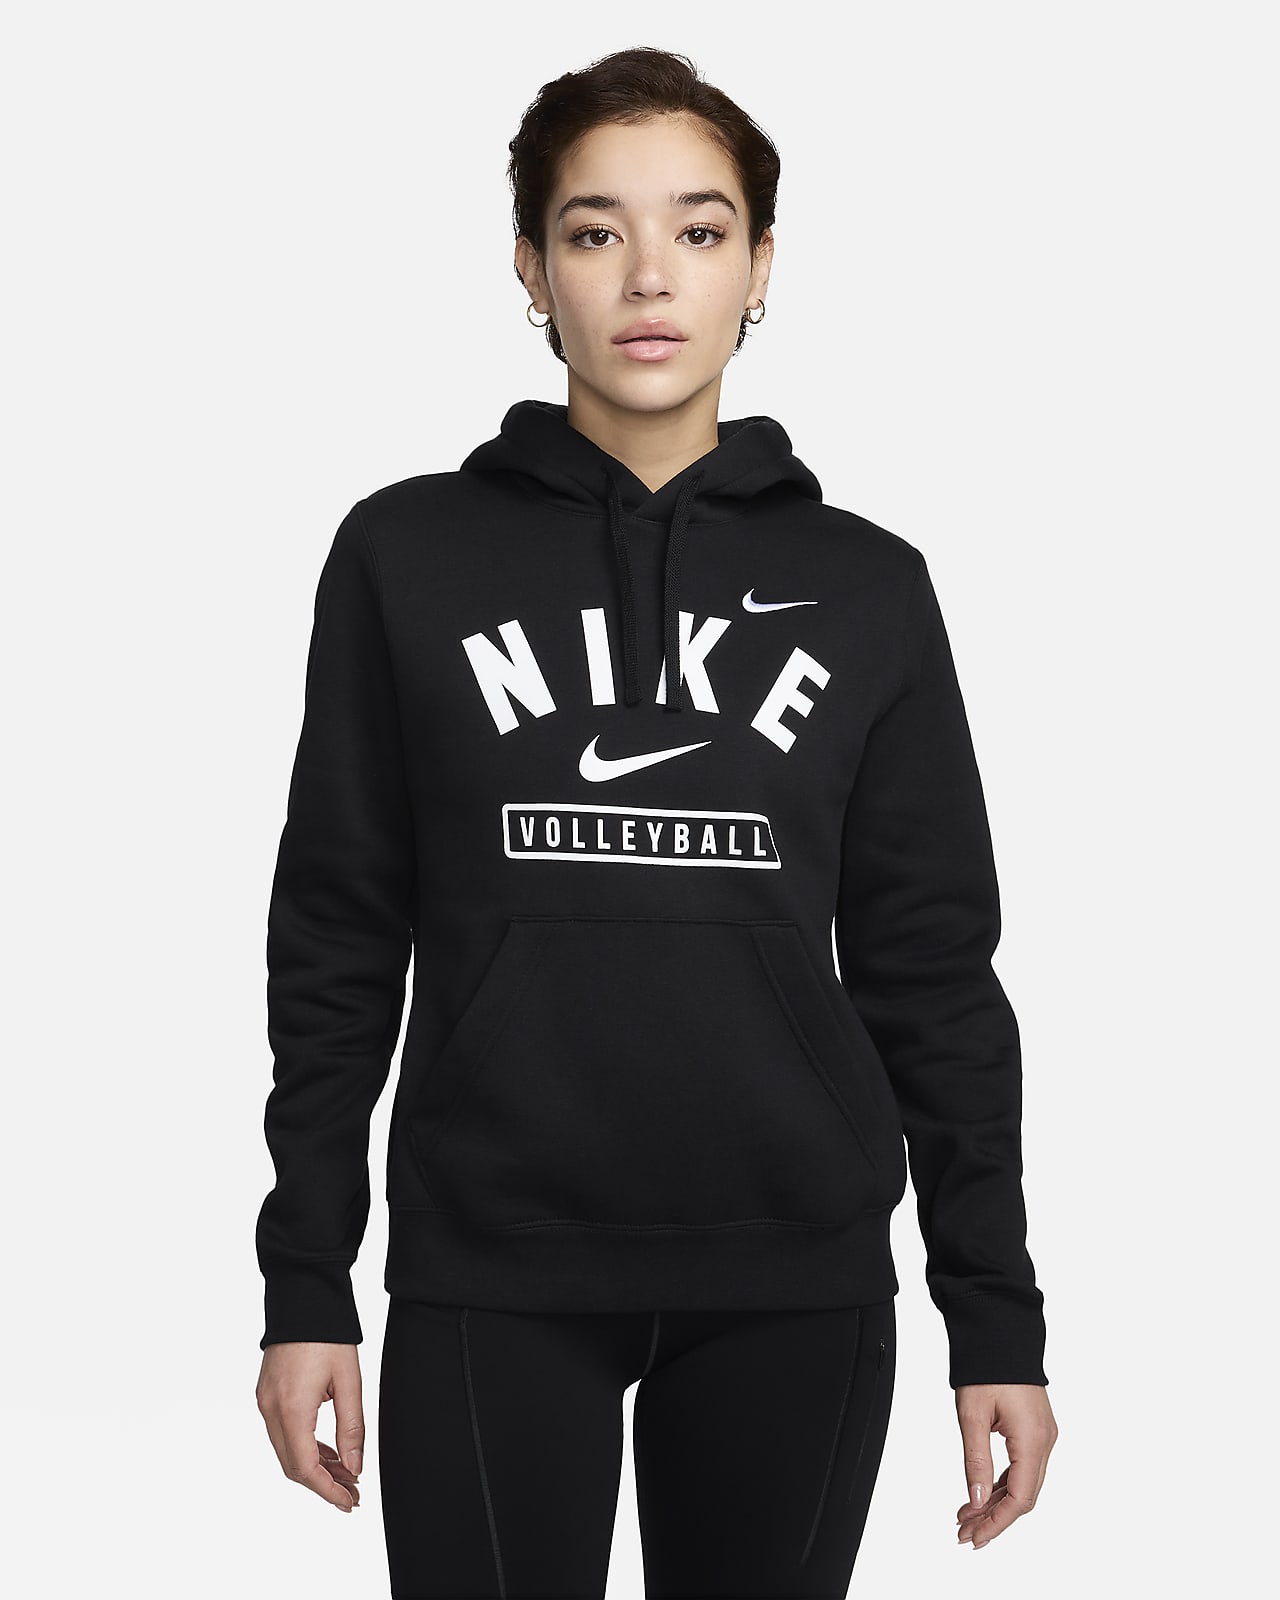 Nike Women's Volleyball Pullover Hoodie